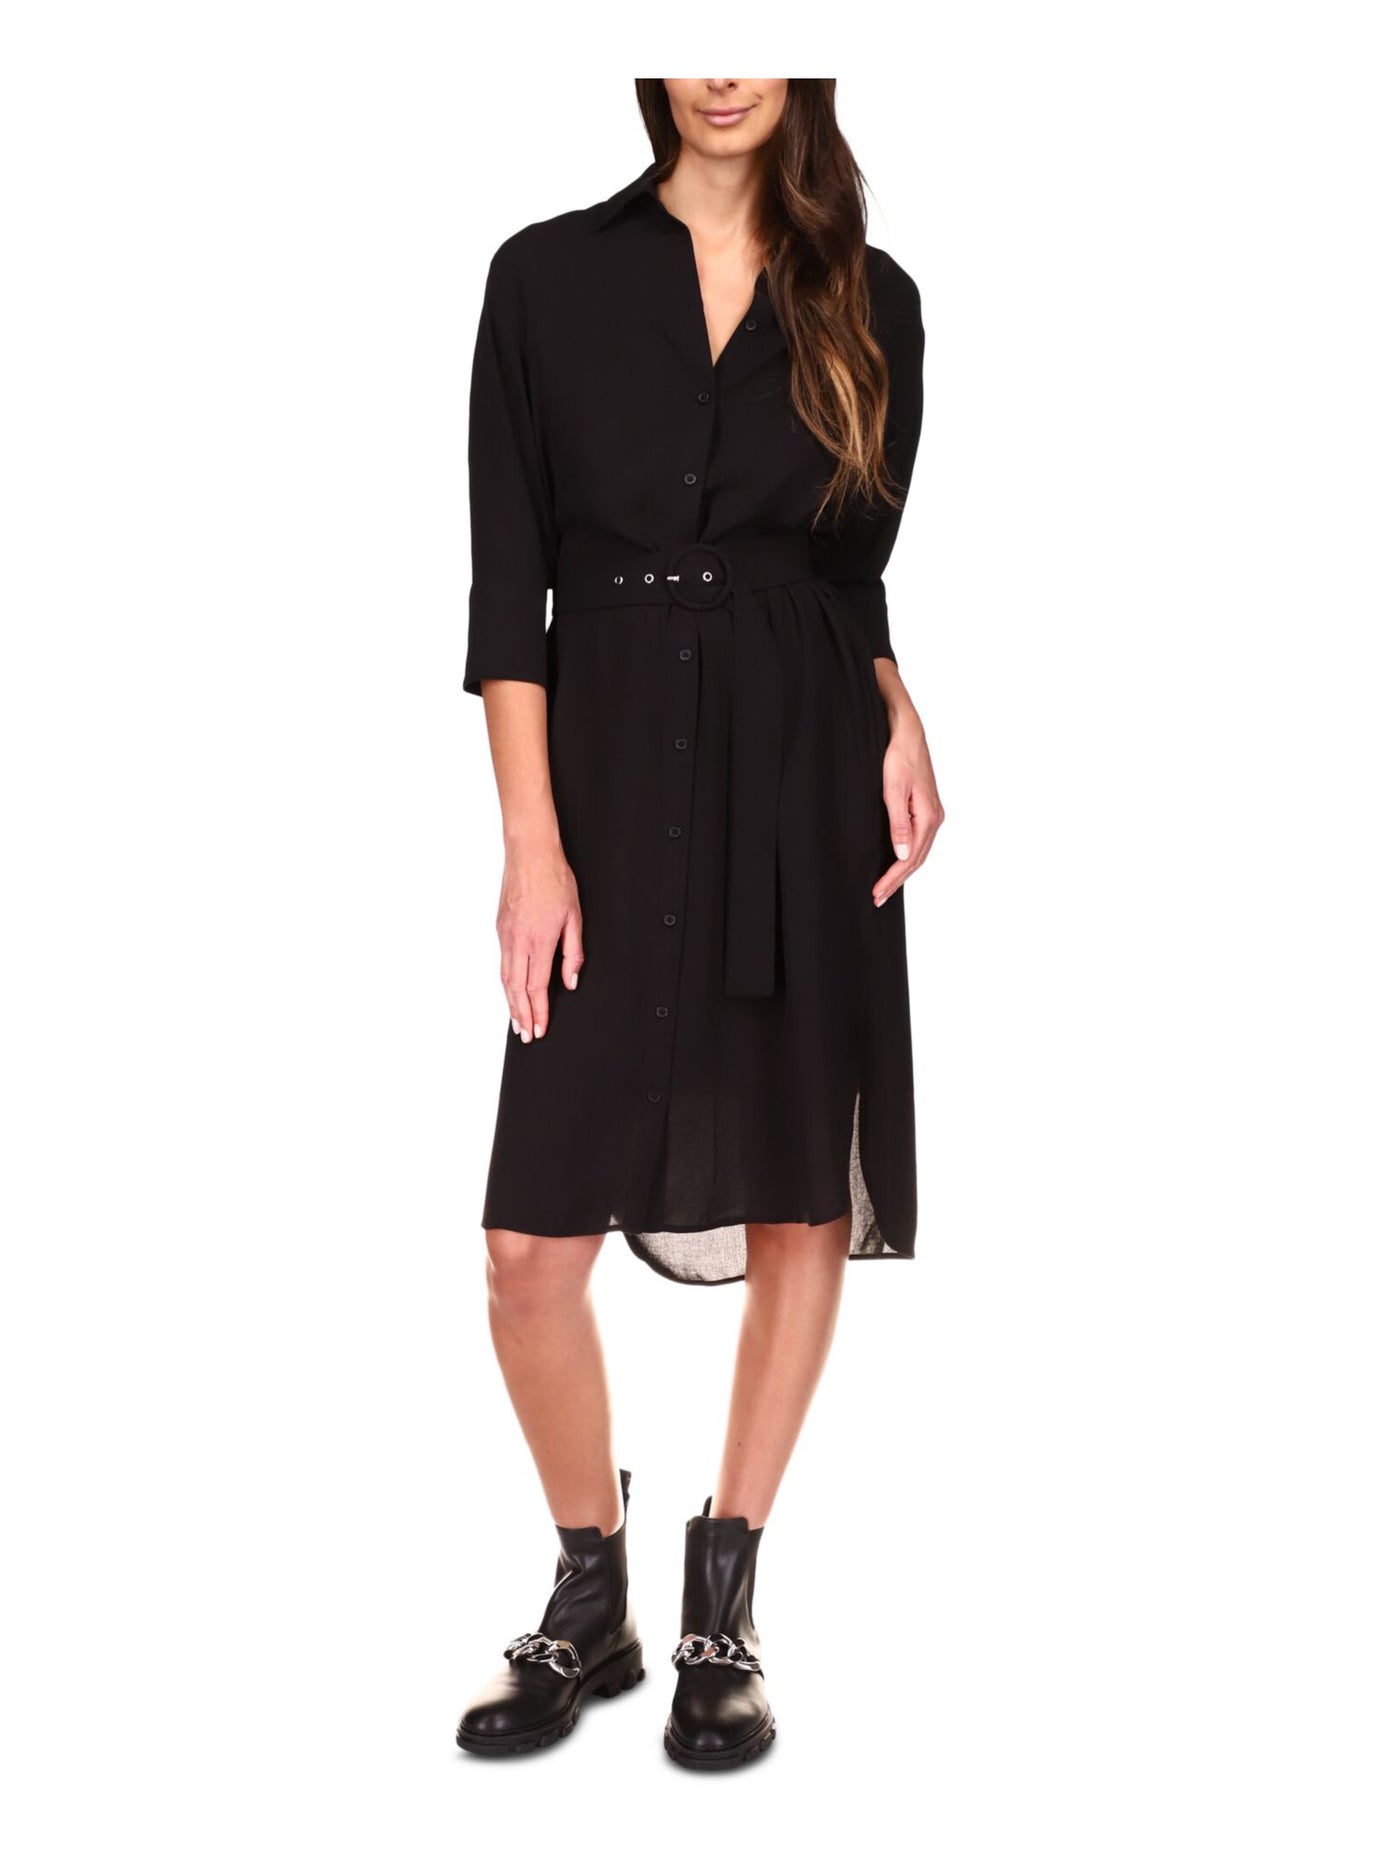 MICHAEL KORS Womens Black Belted Textured Vented Sides Unlined Sheer 3/4 Sleeve Collared Midi Shirt Dress S